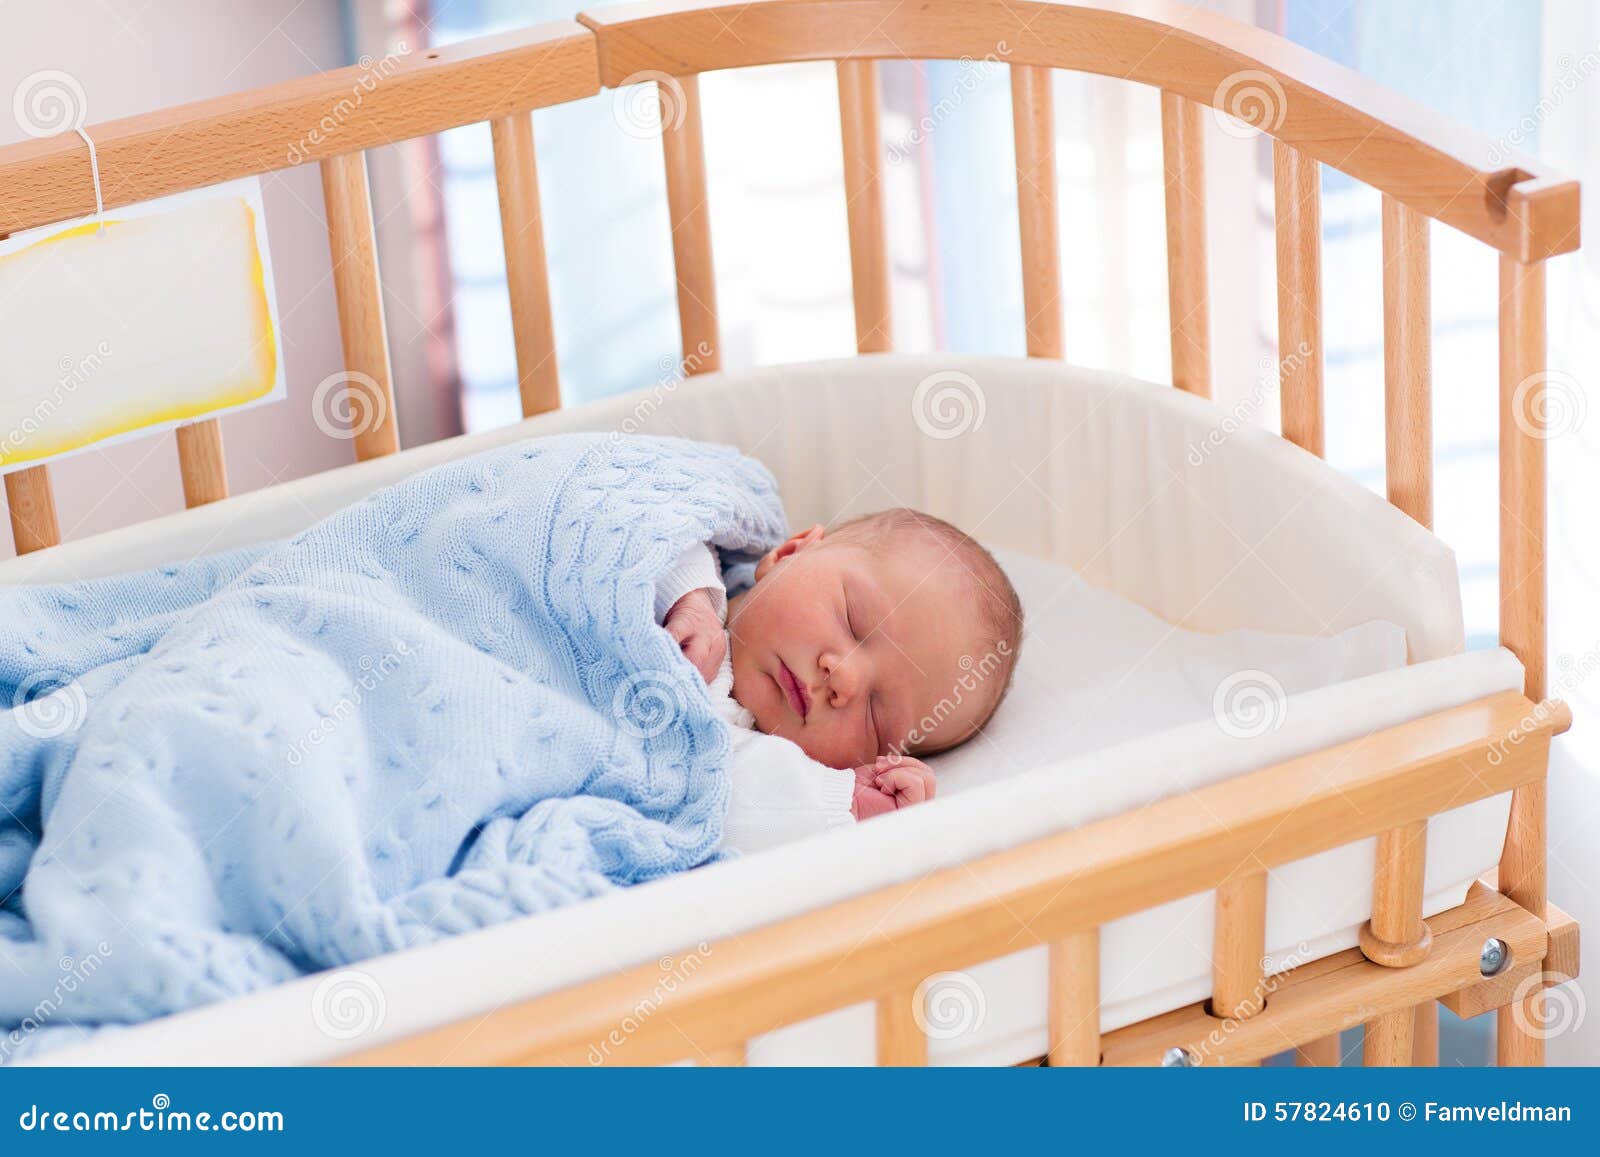 Newborn Baby Boy In Hospital Cot Stock Photo - Image of 